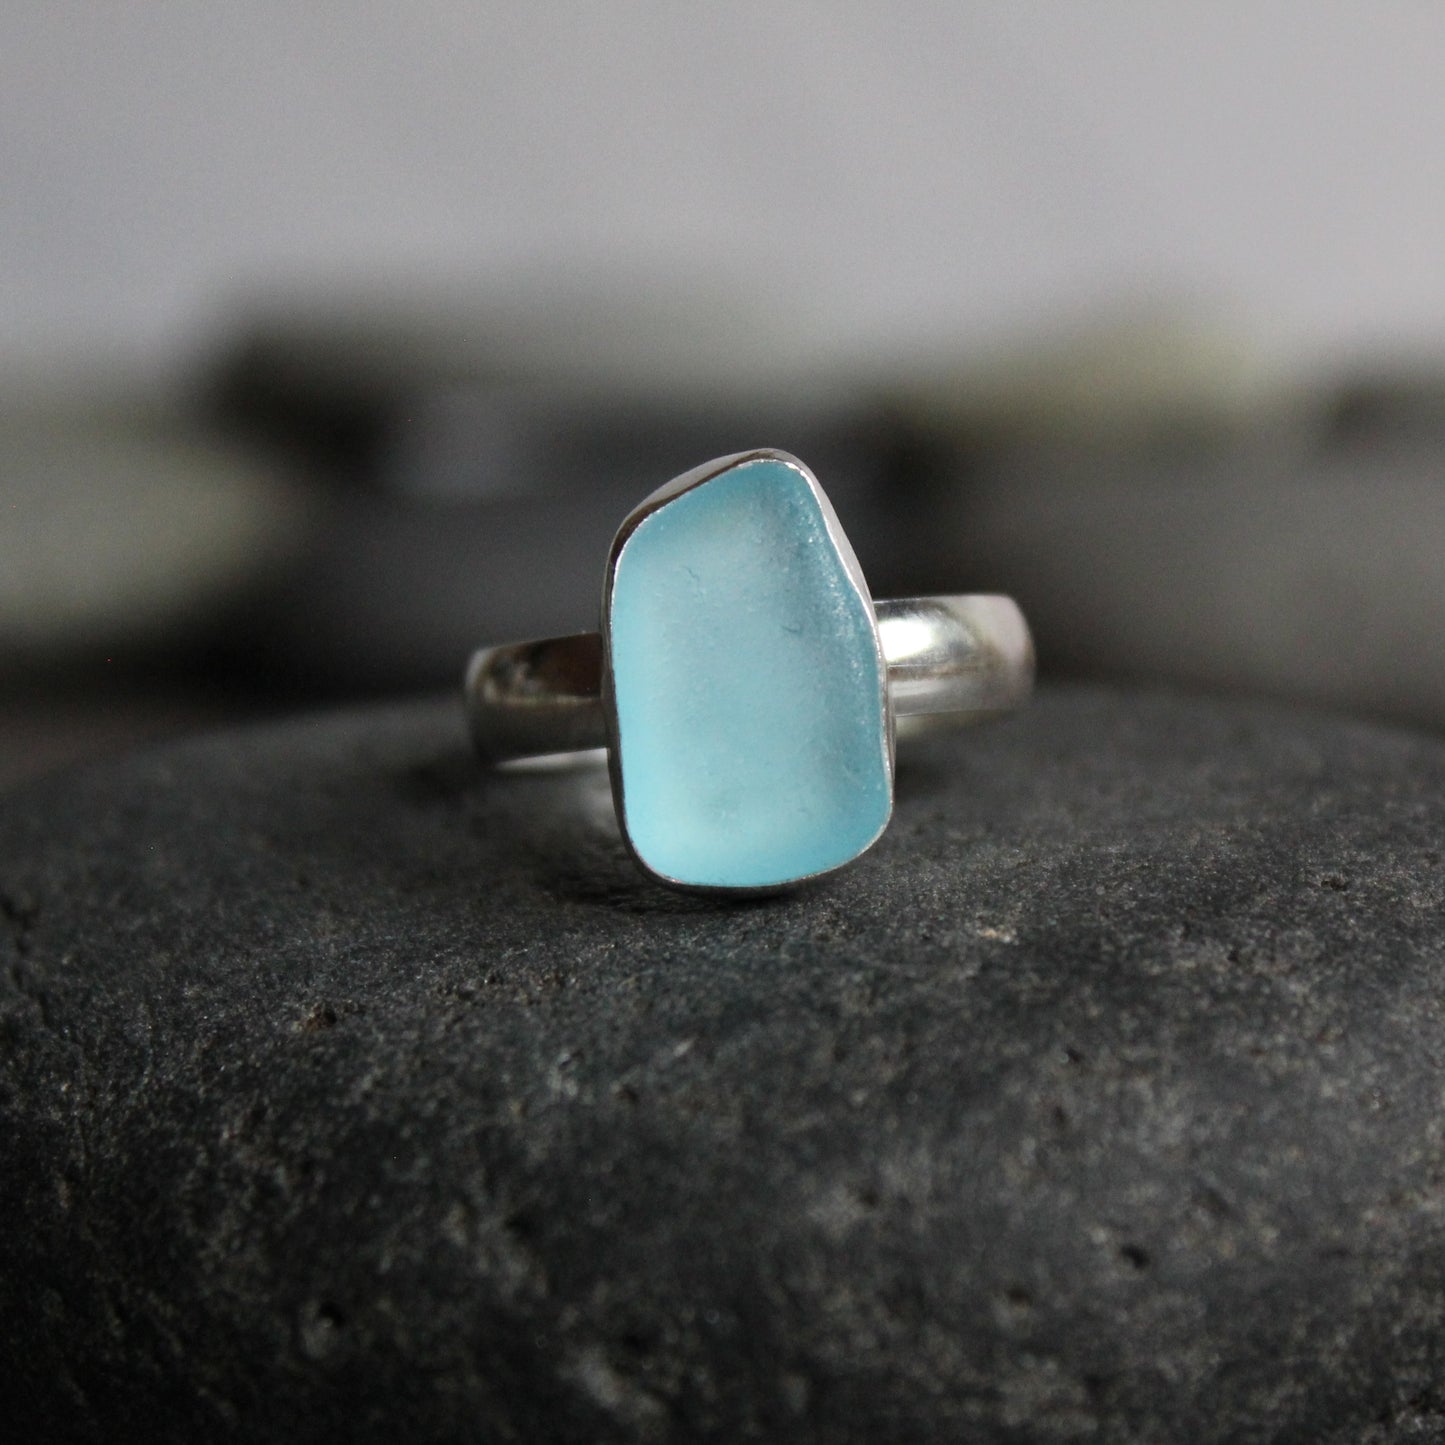 Aqua blue sea glass that is rectangular shaped and set in fine & sterling silver. Size 10. Accent Yourself specializes in sterling silver jewelry handmade by Barb Macy & Will Macy in Corvallis, OR.